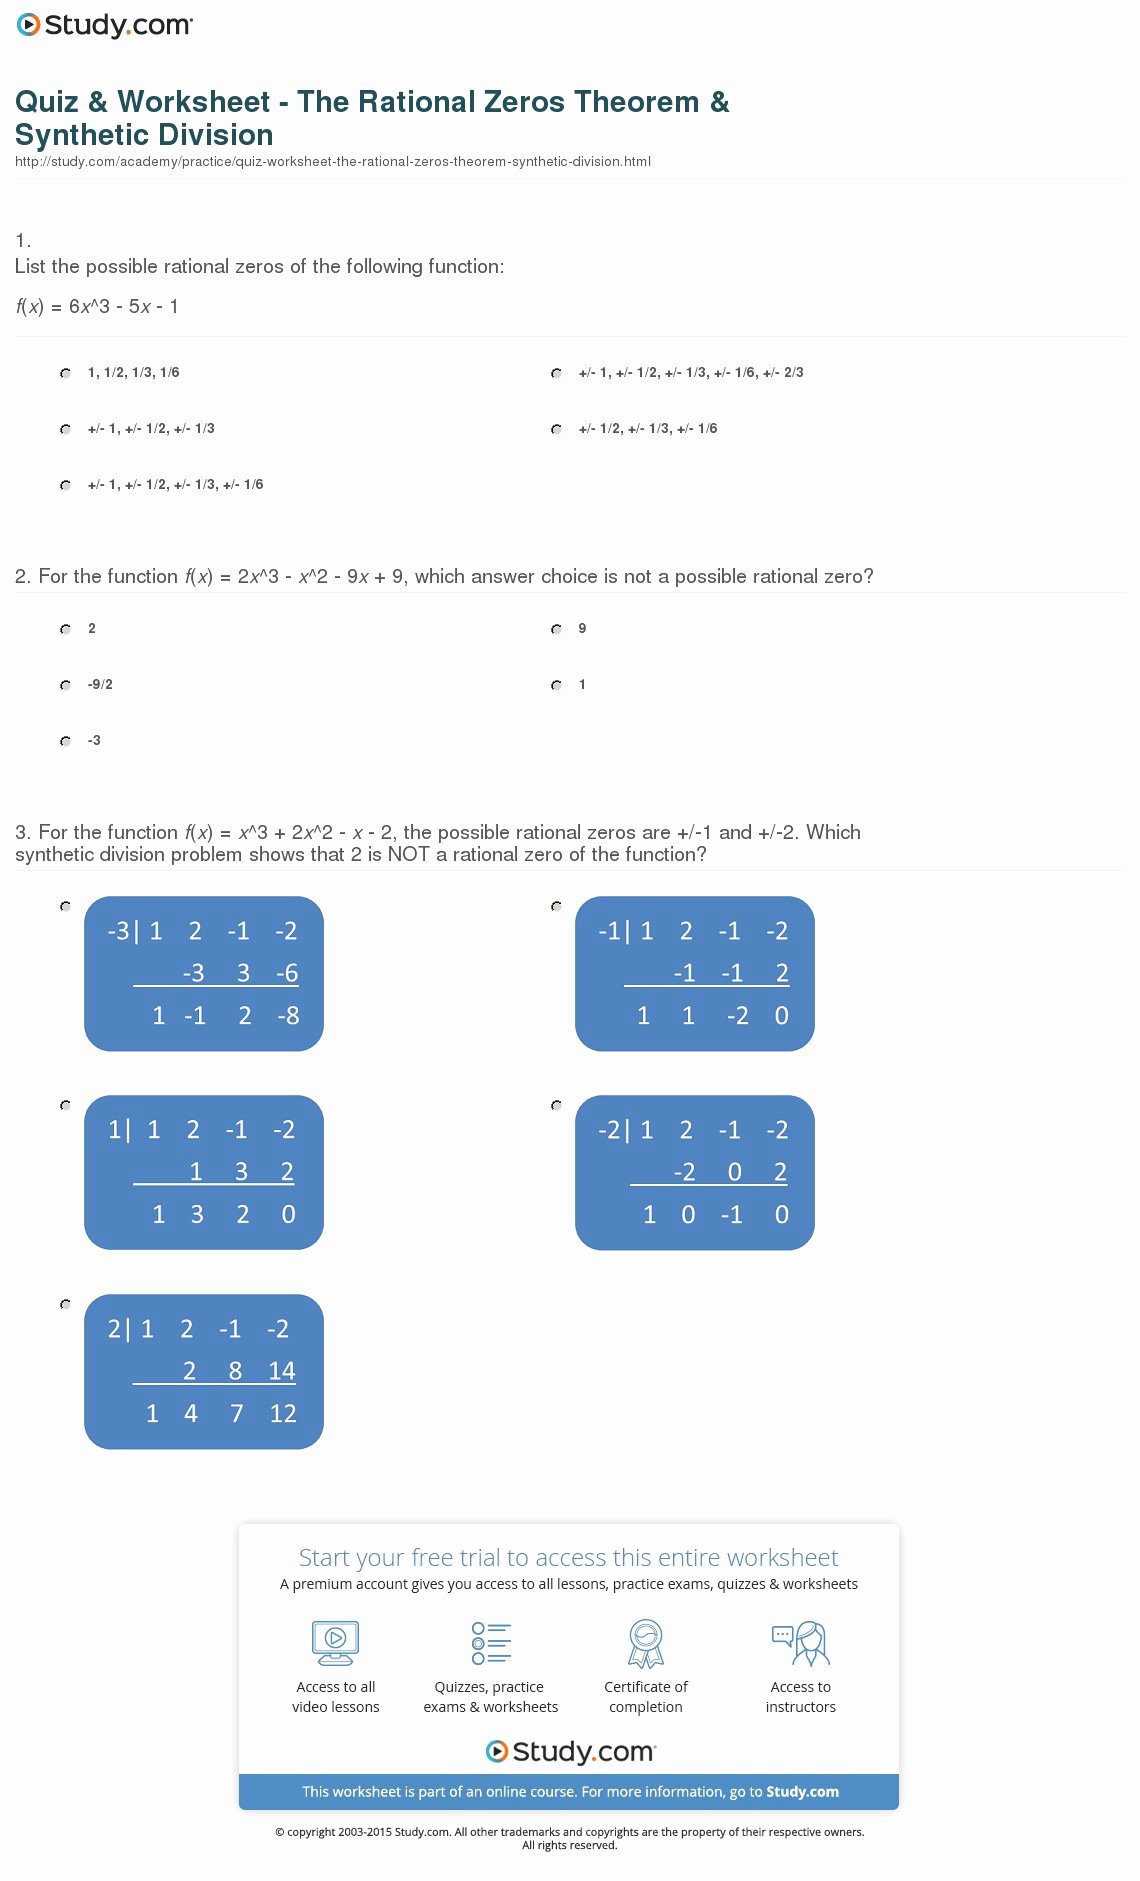 Synthetic Division Worksheet with Answers Lovely Quiz &amp; Worksheet the Rational Zeros theorem &amp; Synthetic